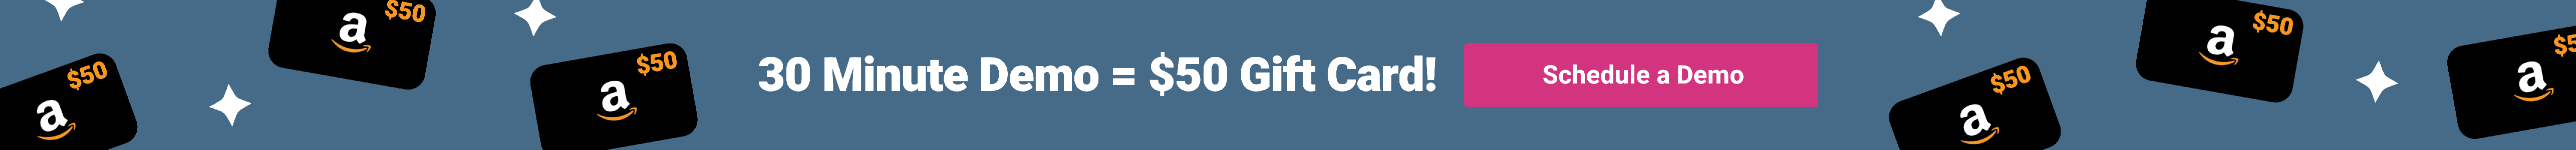 30 Minute Demo = $50 Gift Card